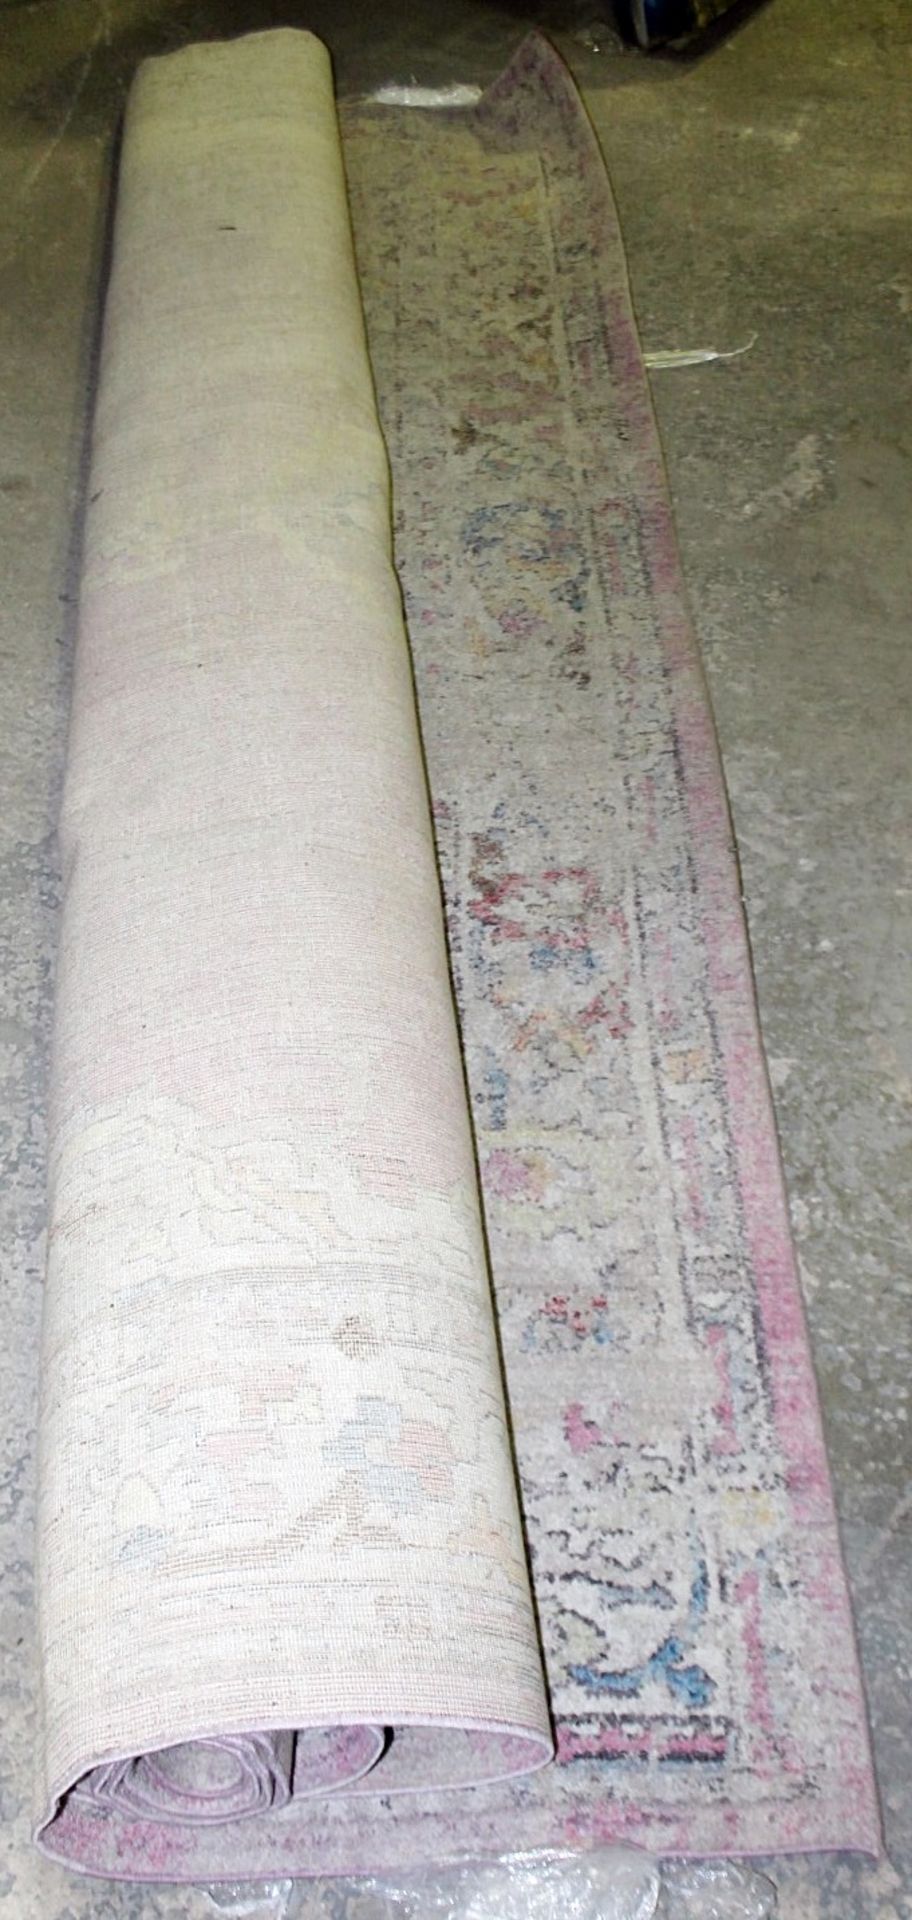 1 x Large Rug Featuring An Distressed Classical-Style Design In Pink - Ex-Showroom Piece - - Image 2 of 3